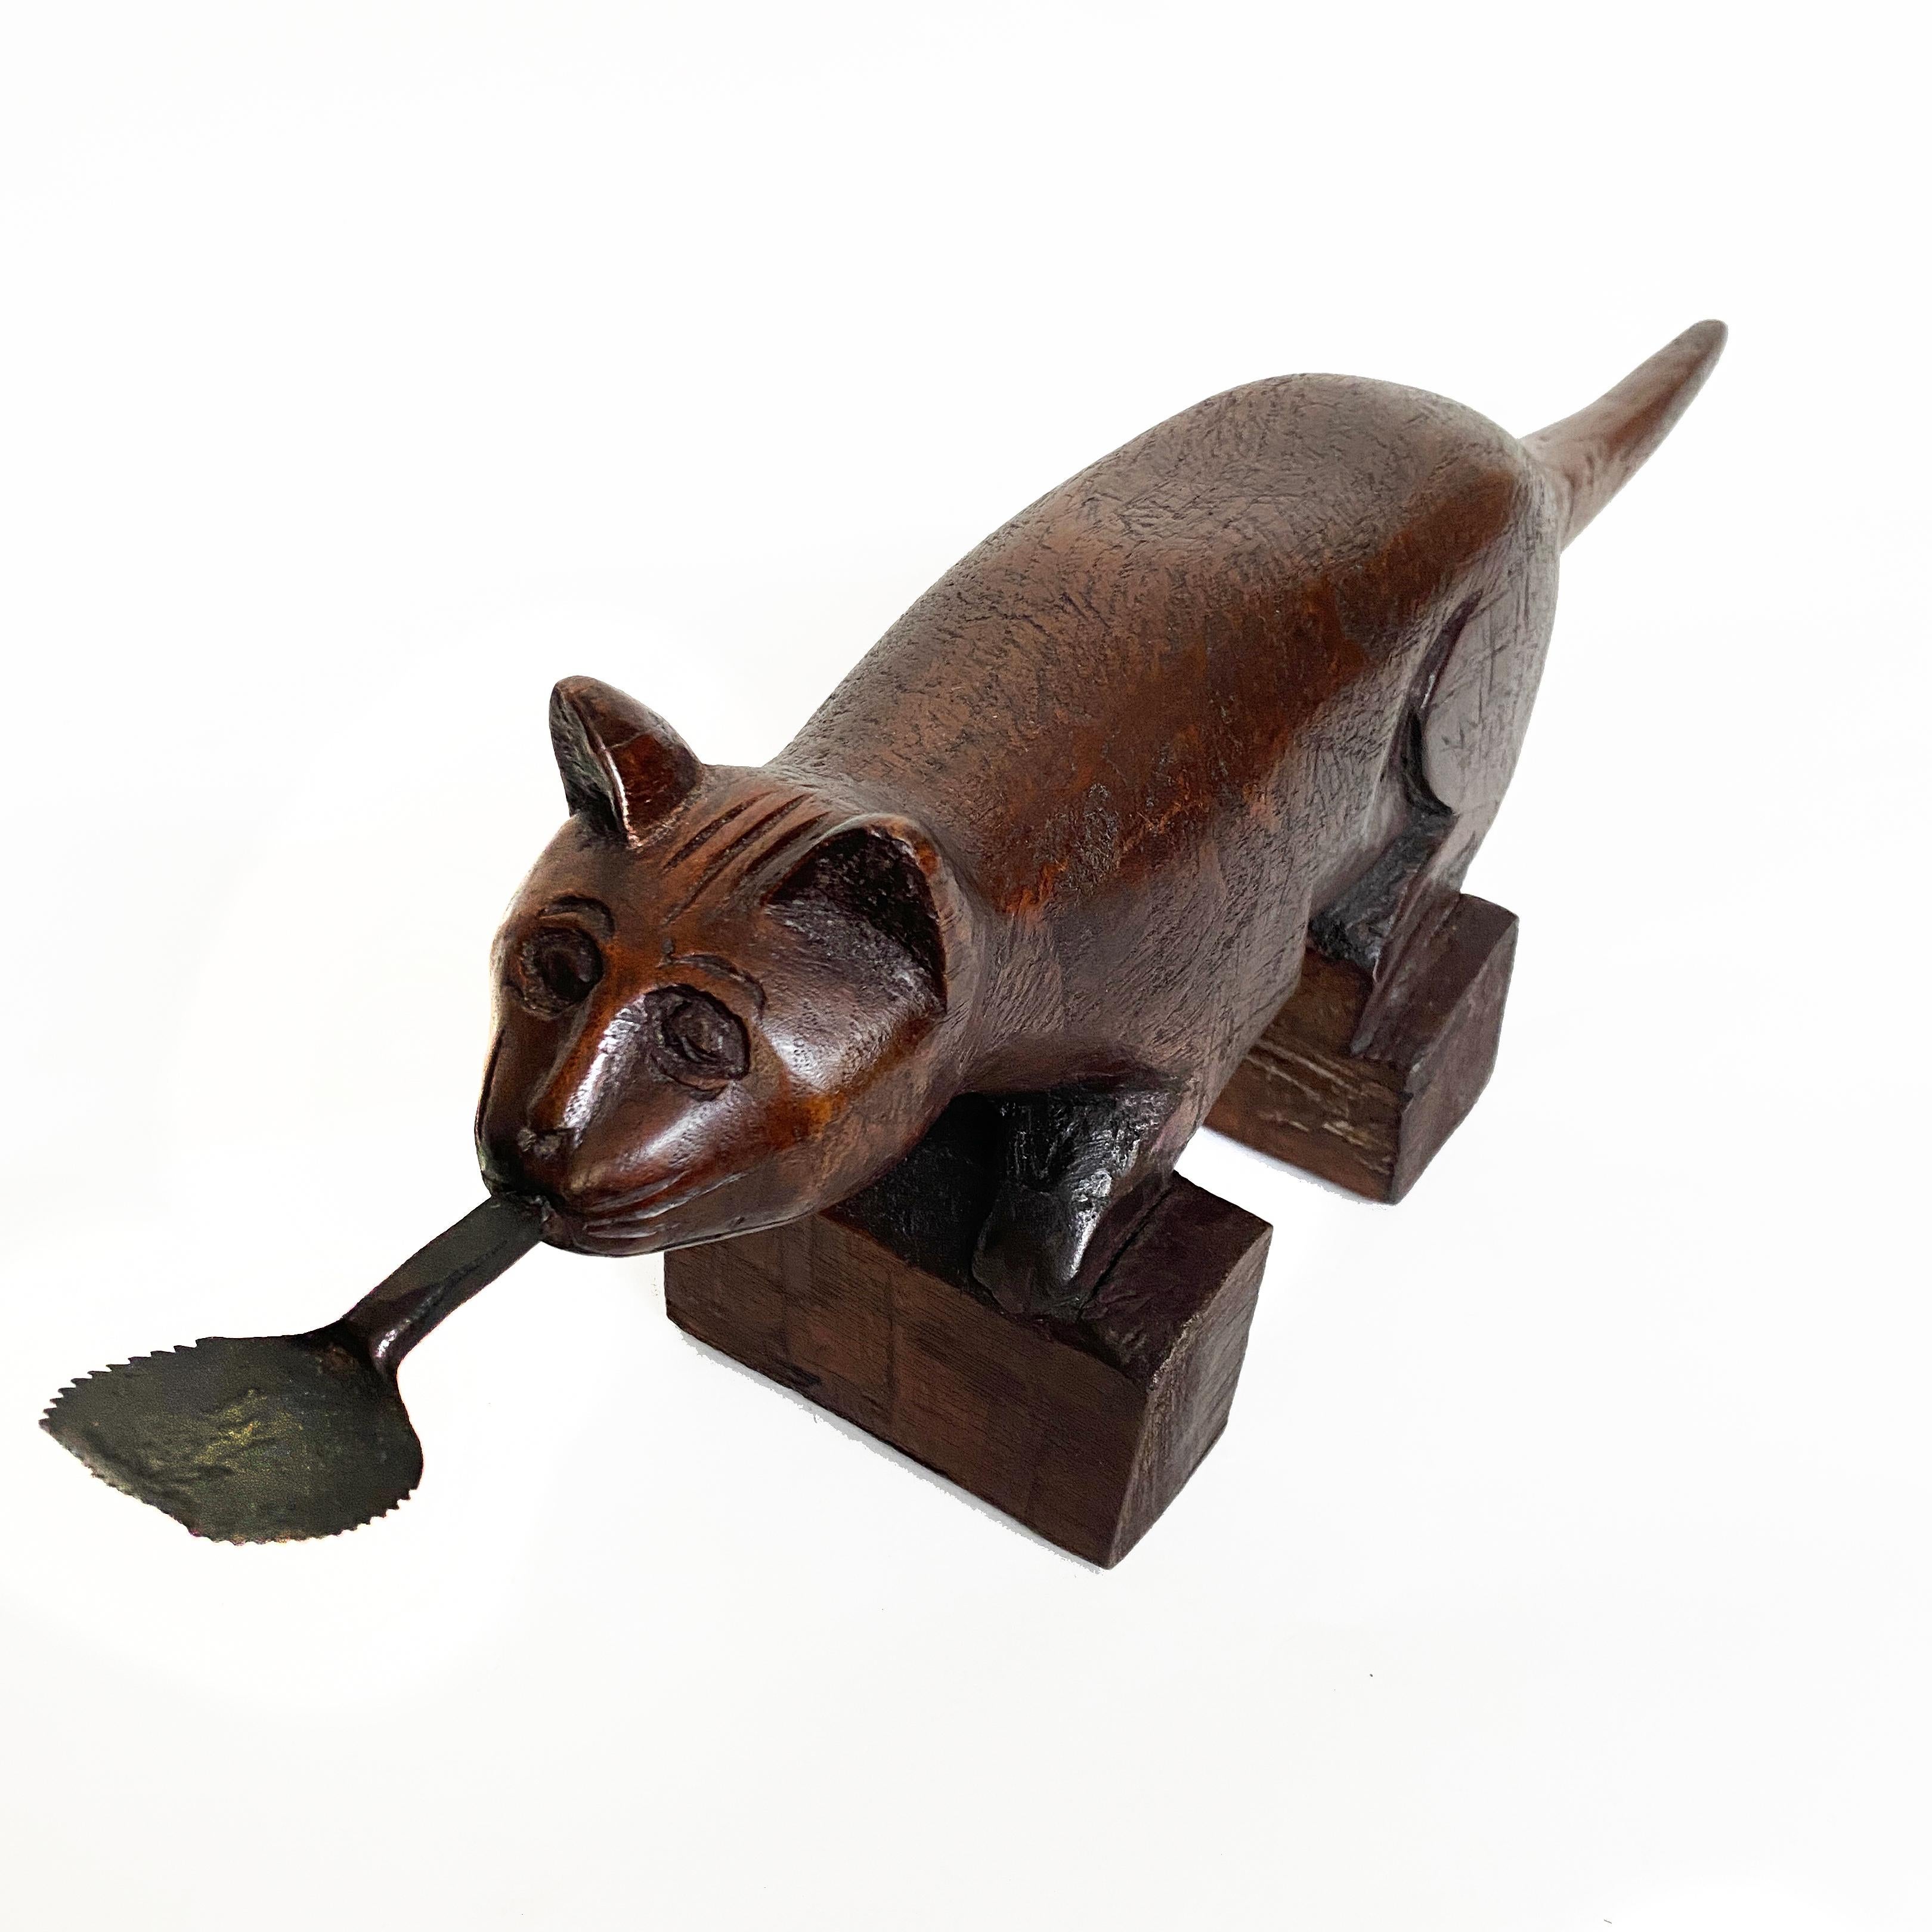 Vintage Wooden Coconut Grater in Animal Form, Thailand

A utilitarian implement commonly used in an Asian household.  To use it, the coconut is cut in half, with one of the halves placed against the blade and slowly rotated.  The patina of the wood